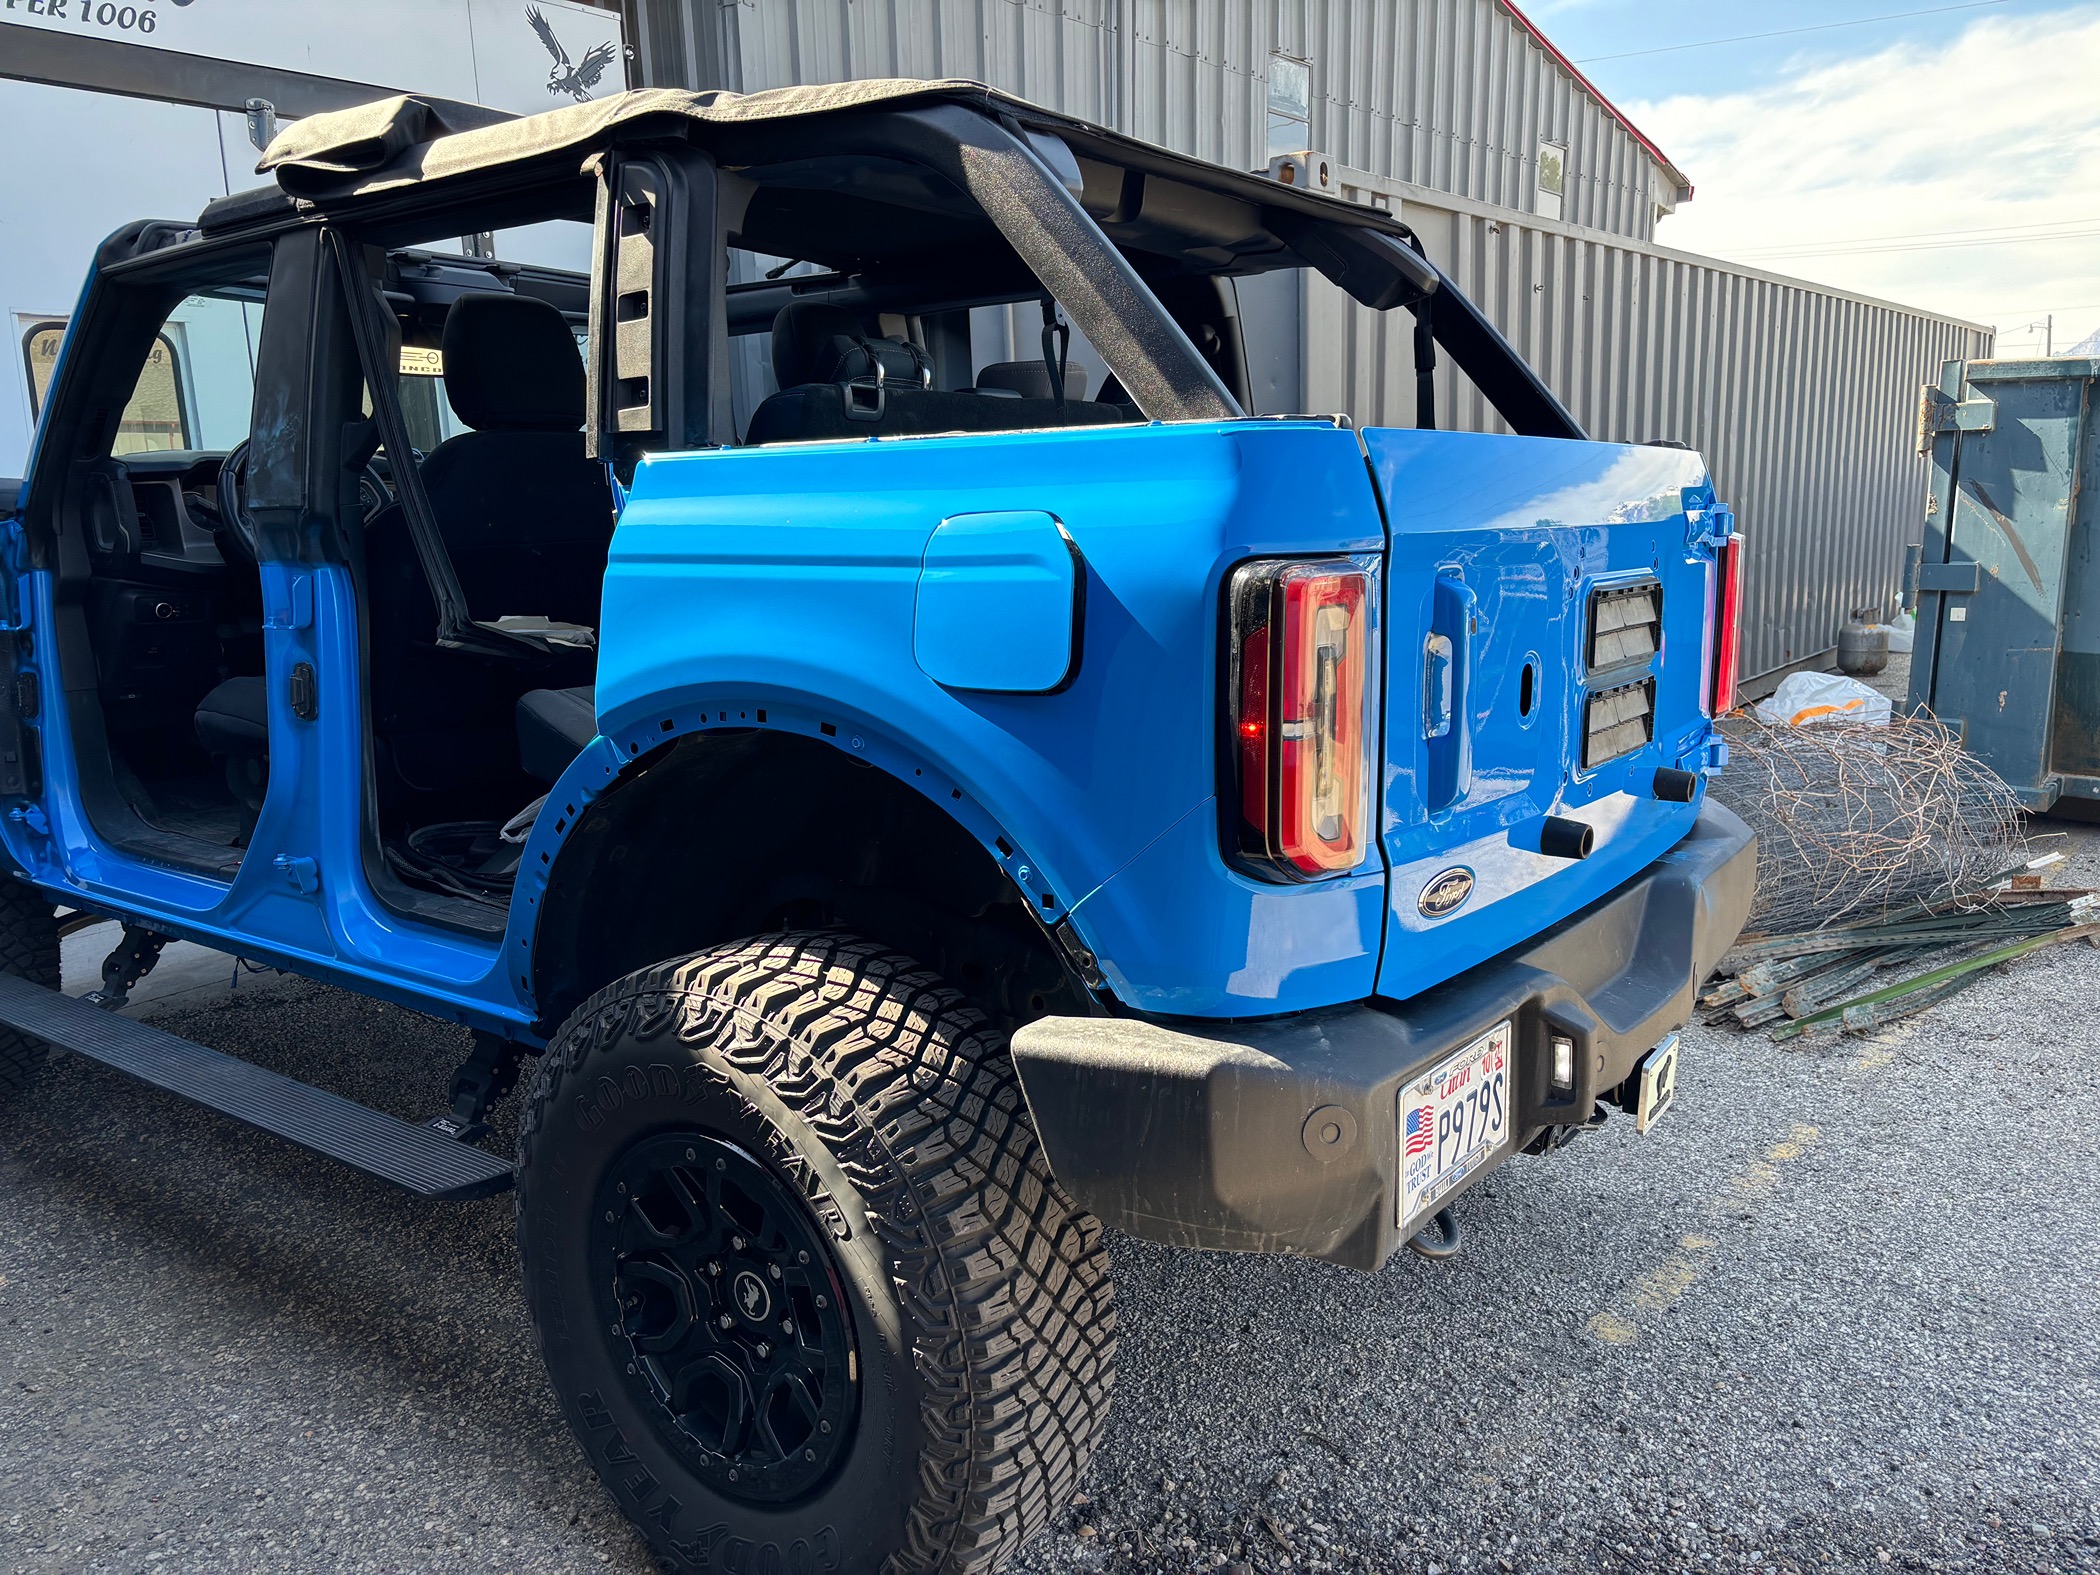 Ford Bronco Finally finished my Grabber Blue Bronco custom repaint! 😁 IMG_0202